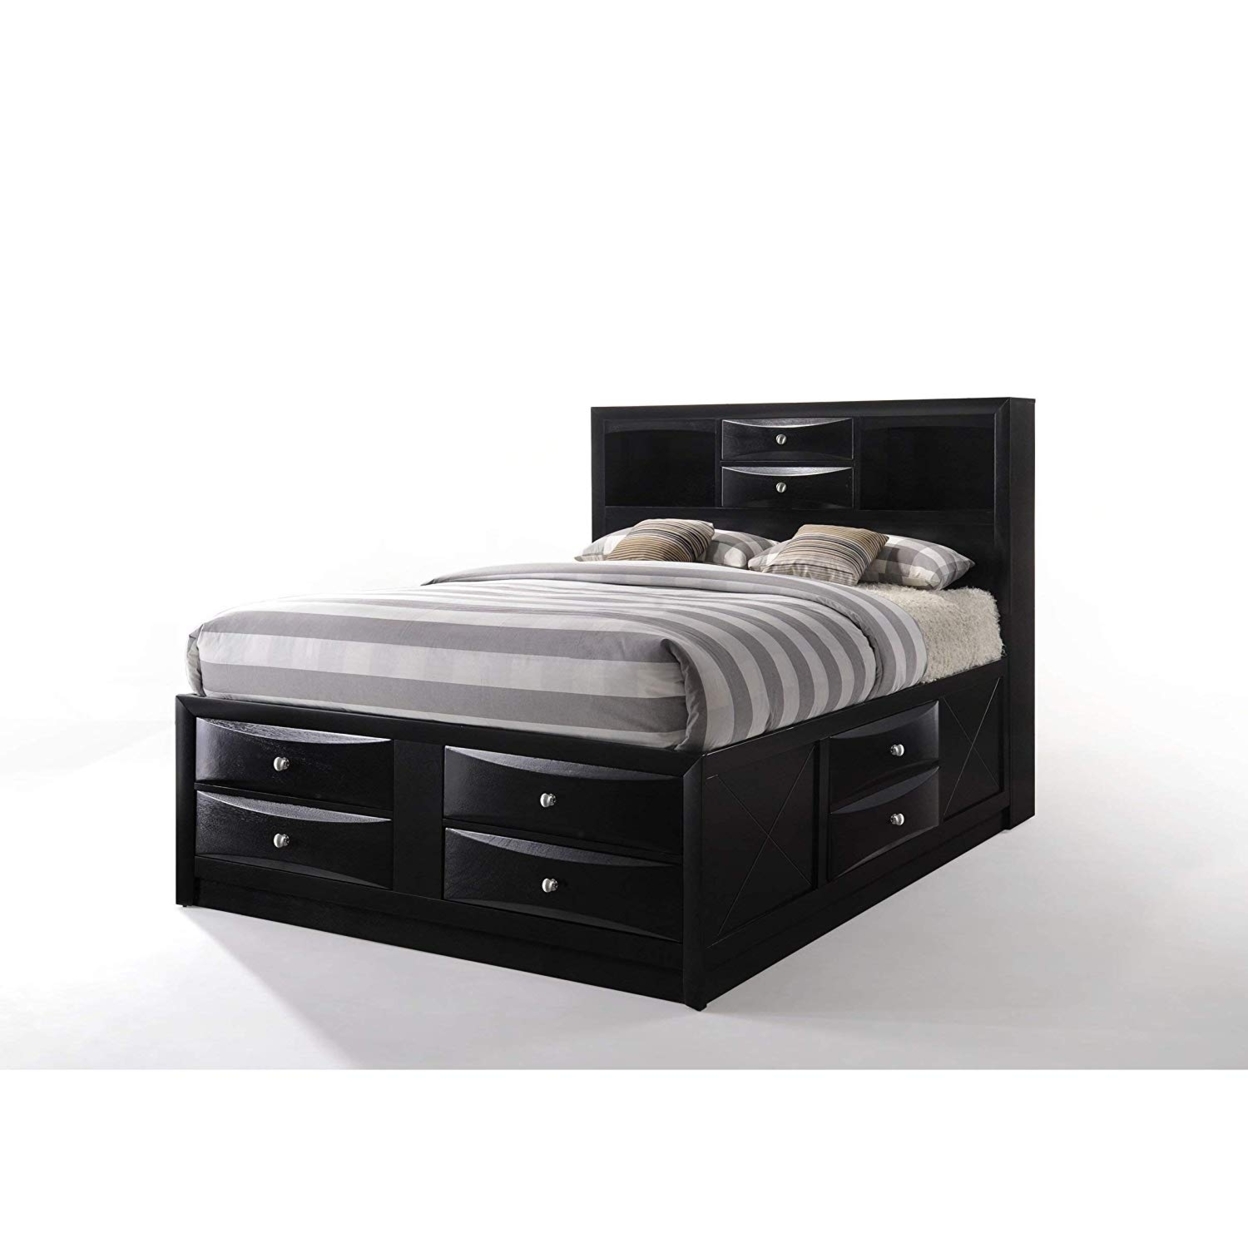 Full Size Wooden Storage Bed With Eight Spacious Drawers, Espresso Brown- Saltoro Sherpi